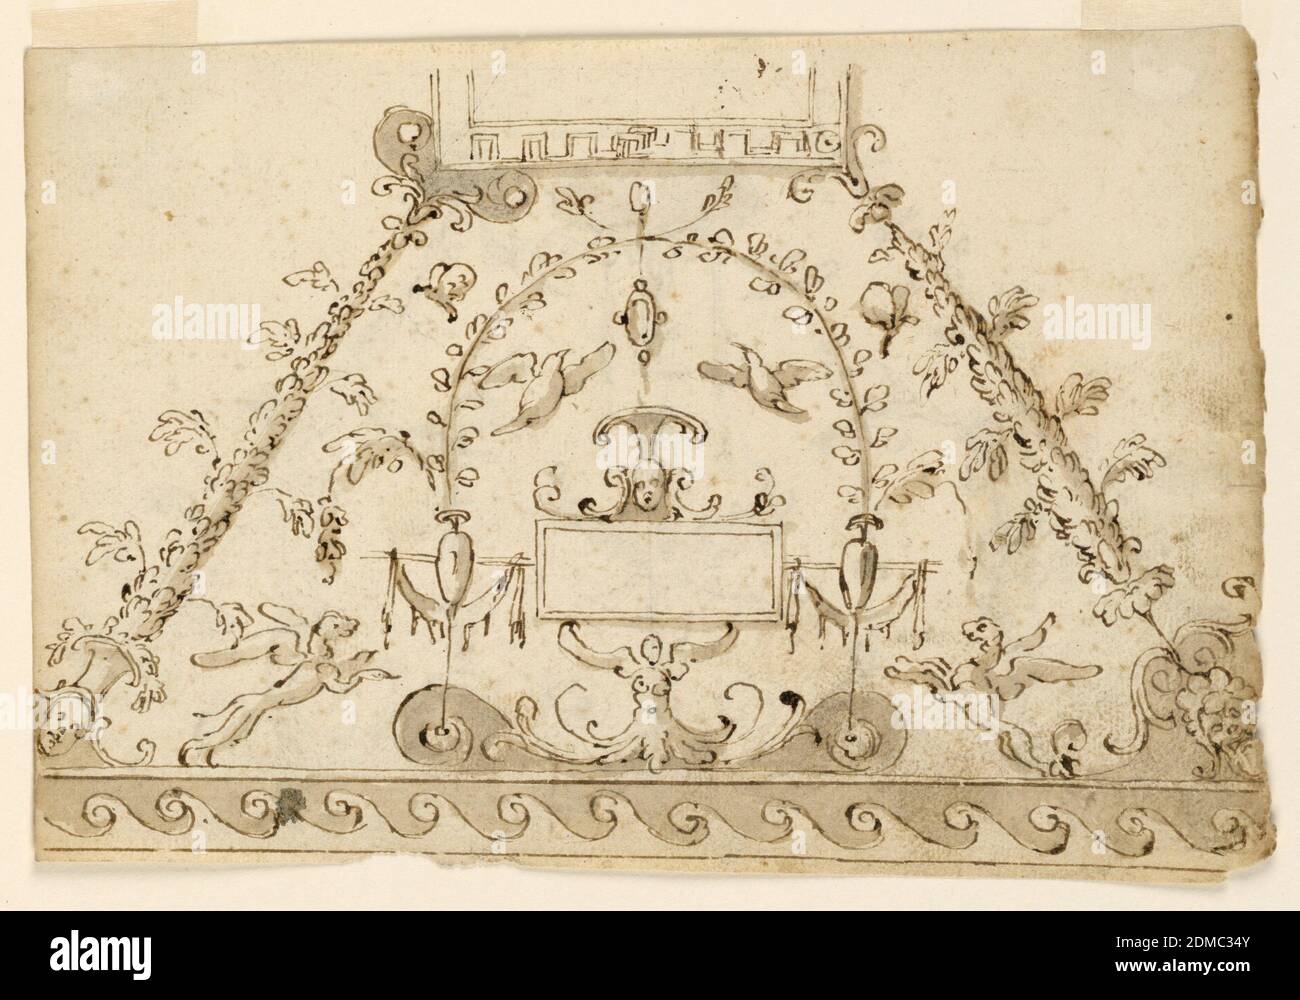 Two Projects for Painted Grotesque Decorations of a Ceiling, Charcoal, pen and ink, brush and greyish-brown watercolor on laid paper., Horizontal rectangle. The wave band is drawn on both sides, fret bands are indicated as decorations of the central frames. Below, in the center of the rhomboidal panel is an ooblong tablet support by the wings of a half-figure. Rinceaux bars spring with vases from which branches rise, forming a half circular panel. Enclosed are two birds and a hanging gem. Below are two winged tigers. Stock Photo